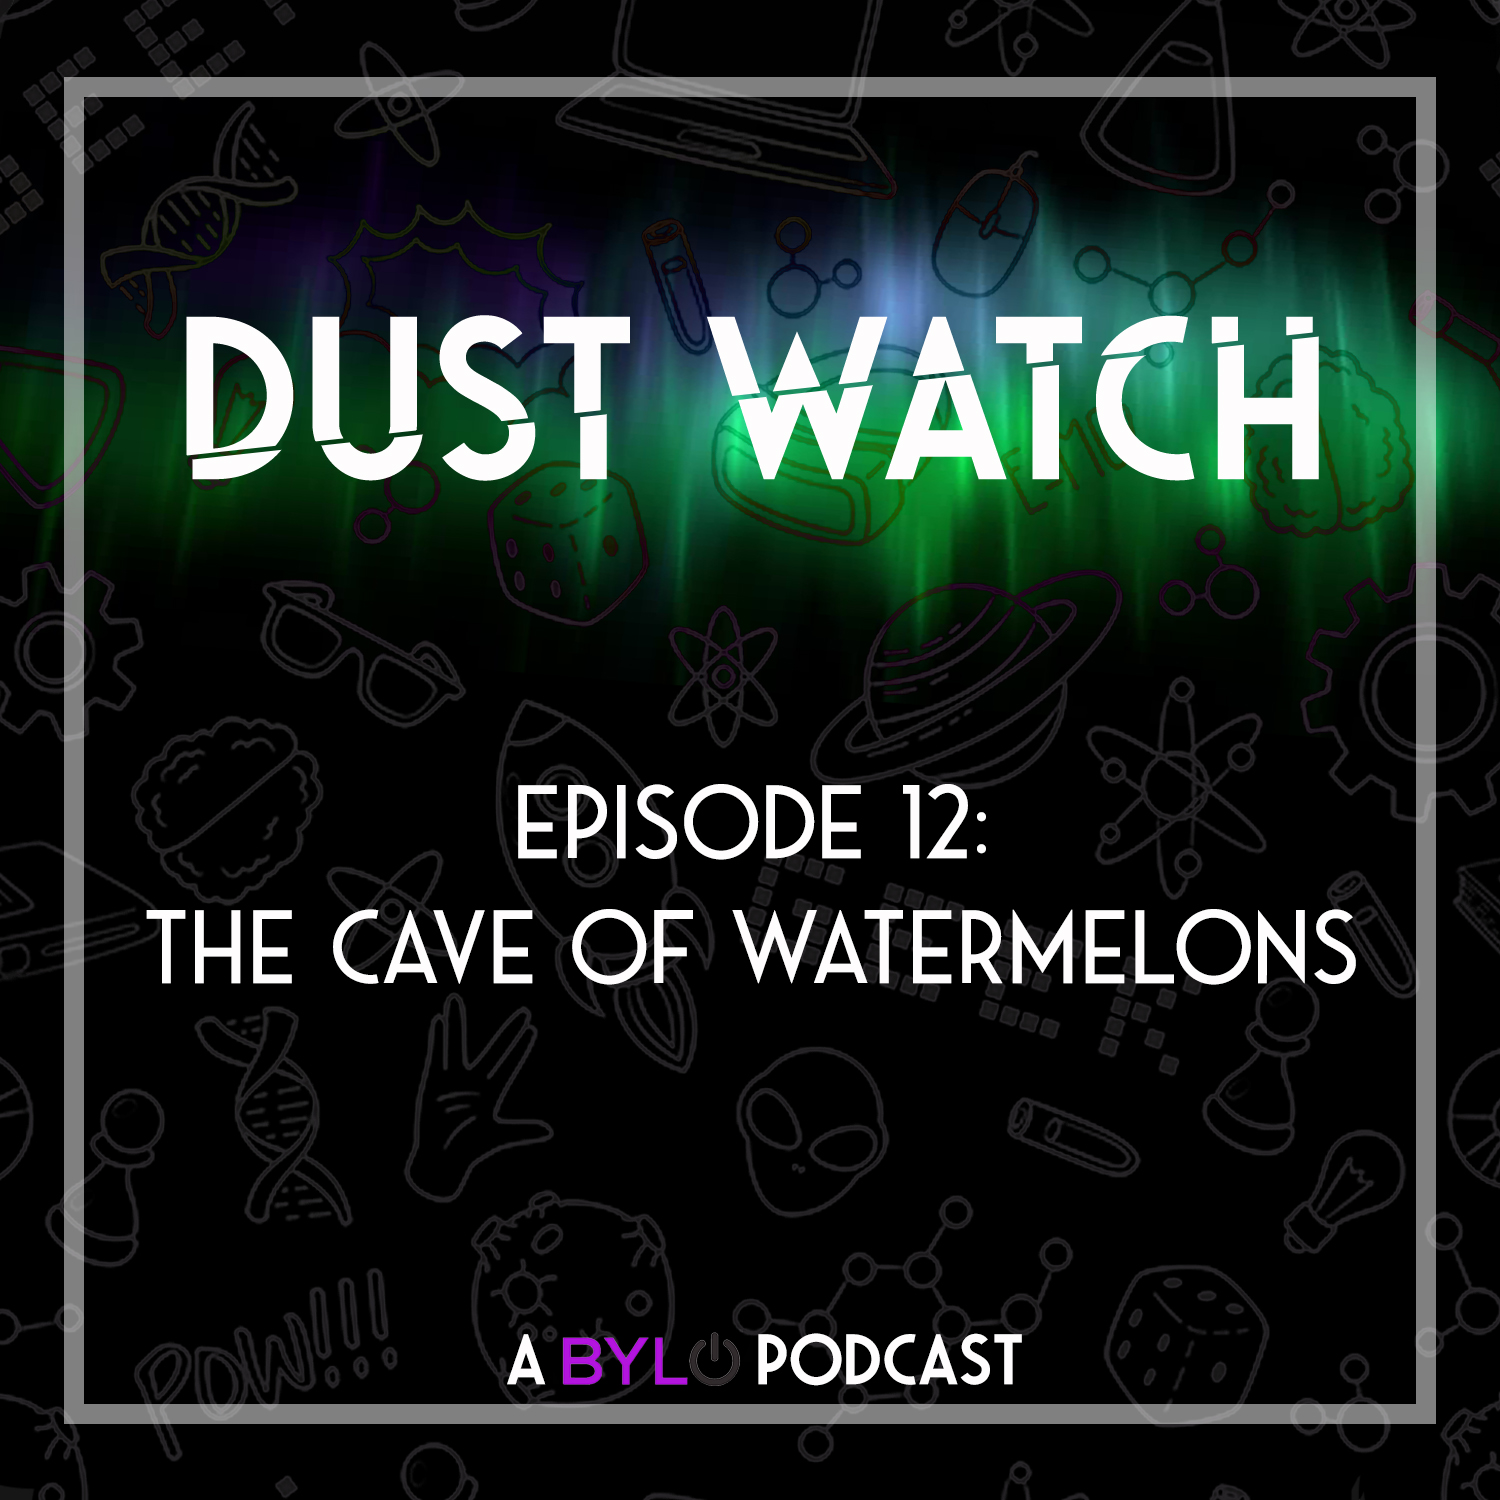 Dust Watch ep 12: Season 2 -The Cave of Watermelons